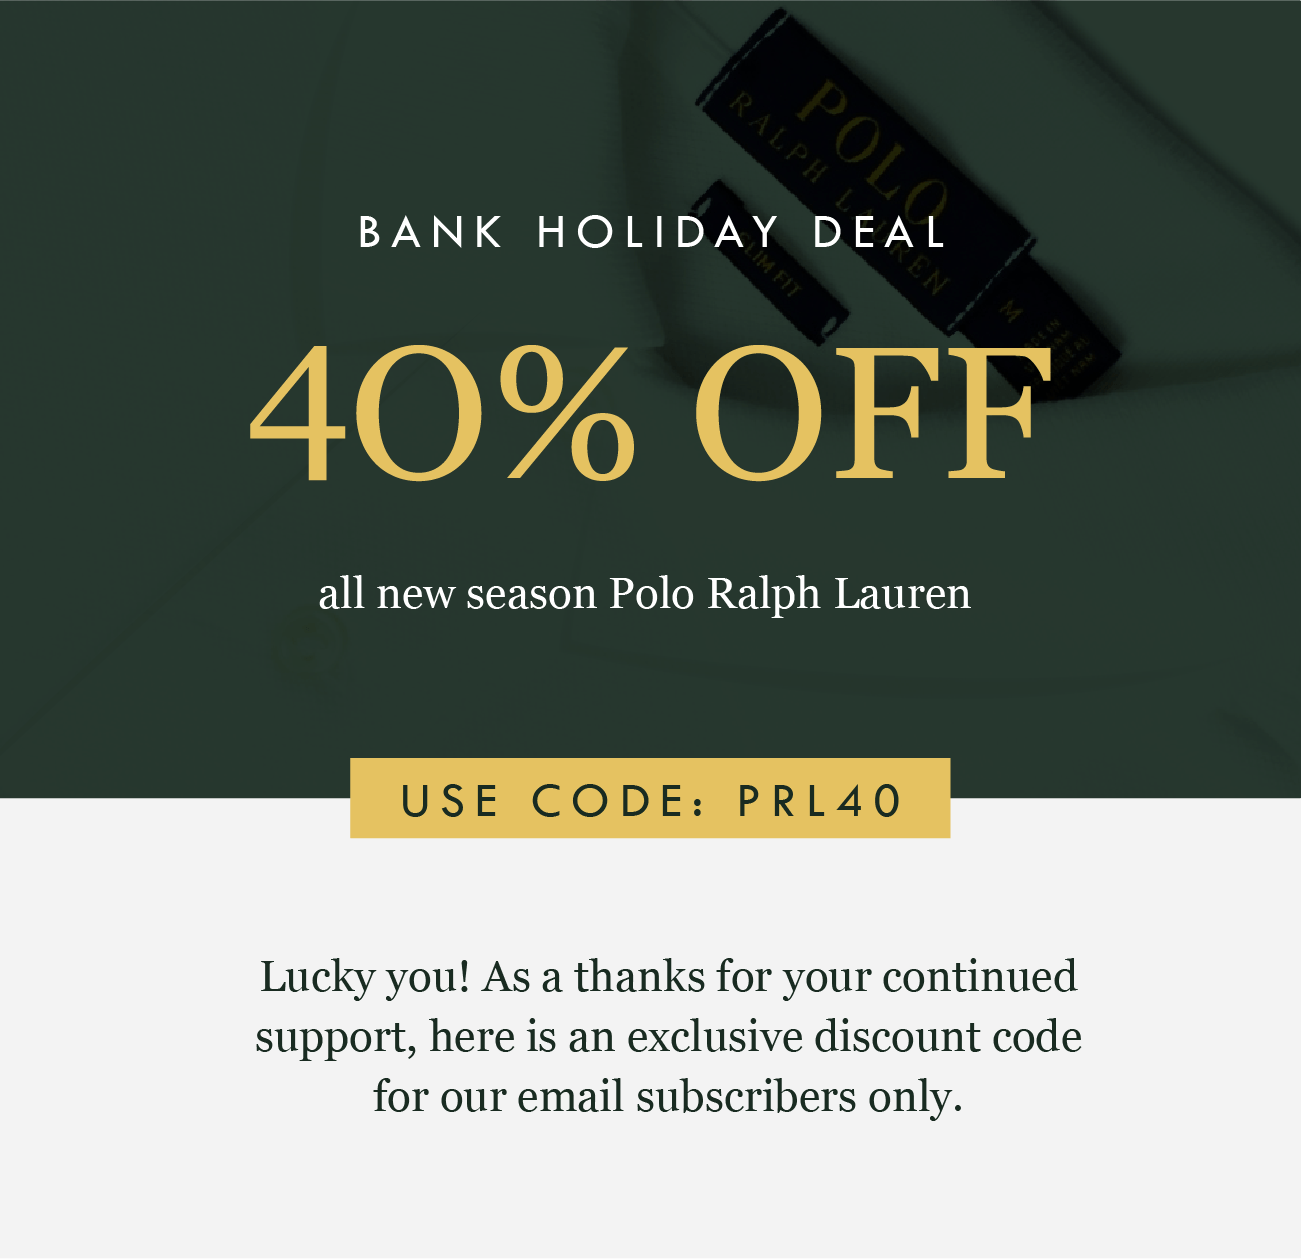 BANK HOLIDAY DEAL
40% OFF
all new season Polo Ralph Lauren
USE CODE: PRL40

Lucky you! As a thanks for your continued support, here is an exclusive discount code for our email subscribers only.